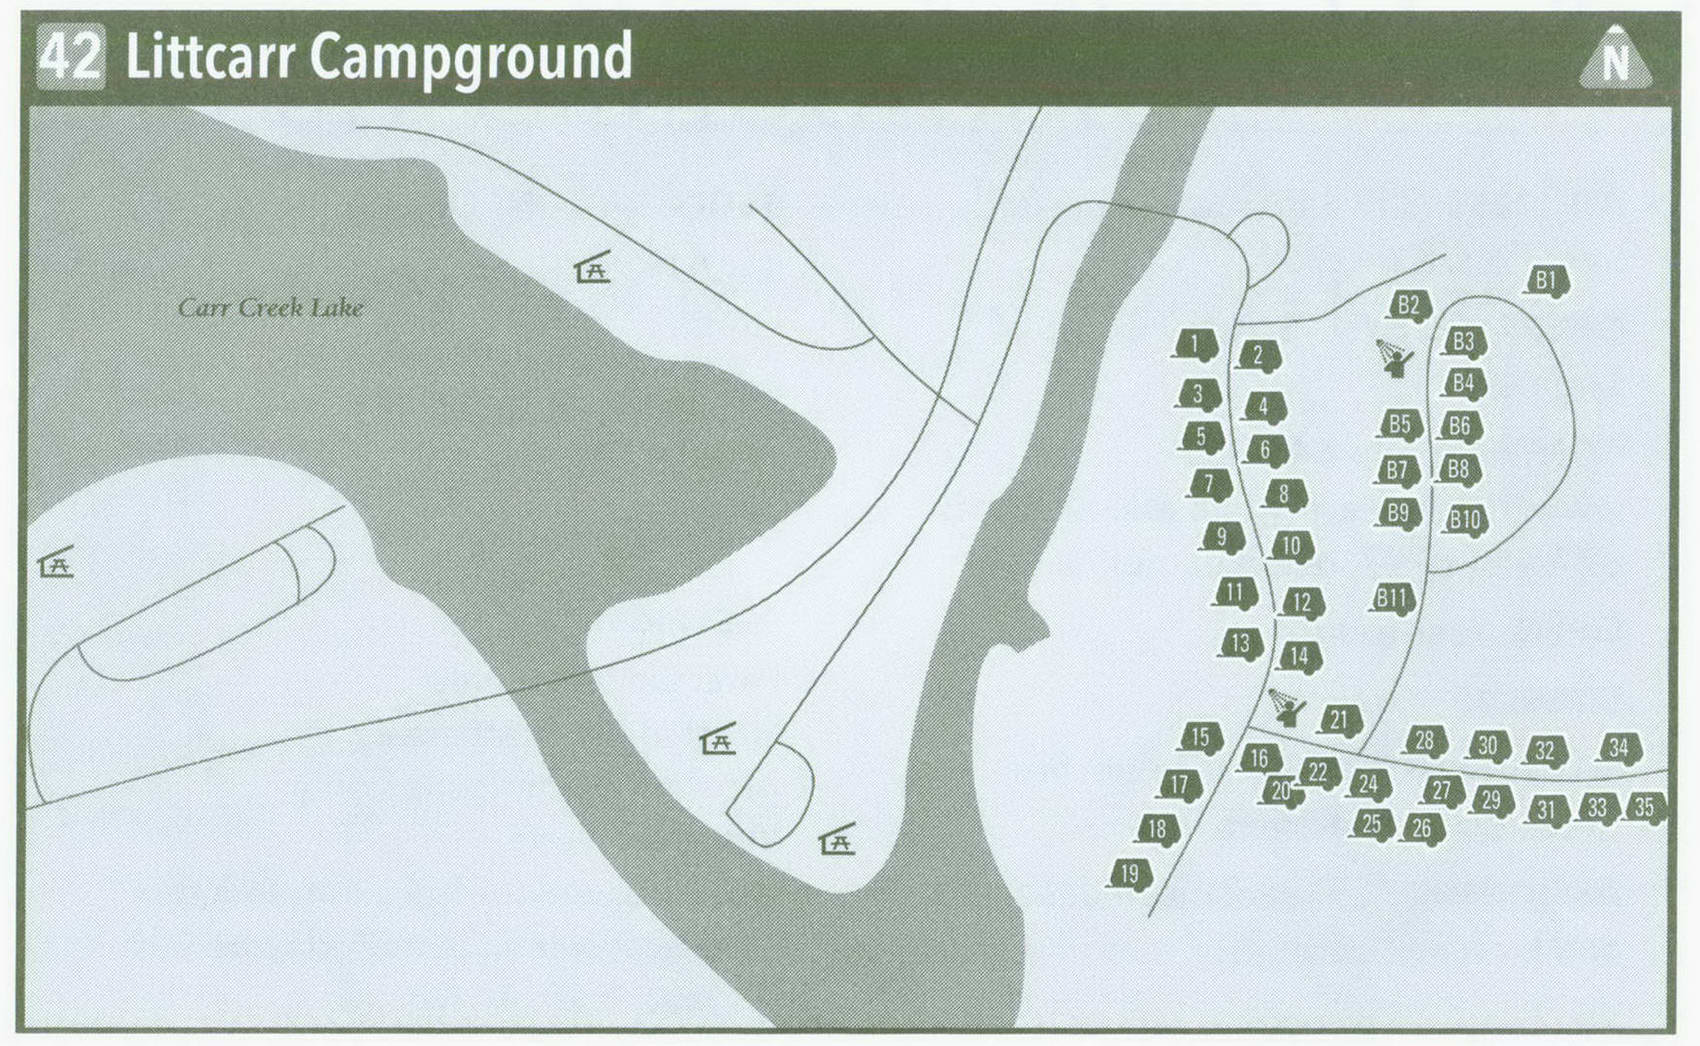 Plan of Littcarr Campground